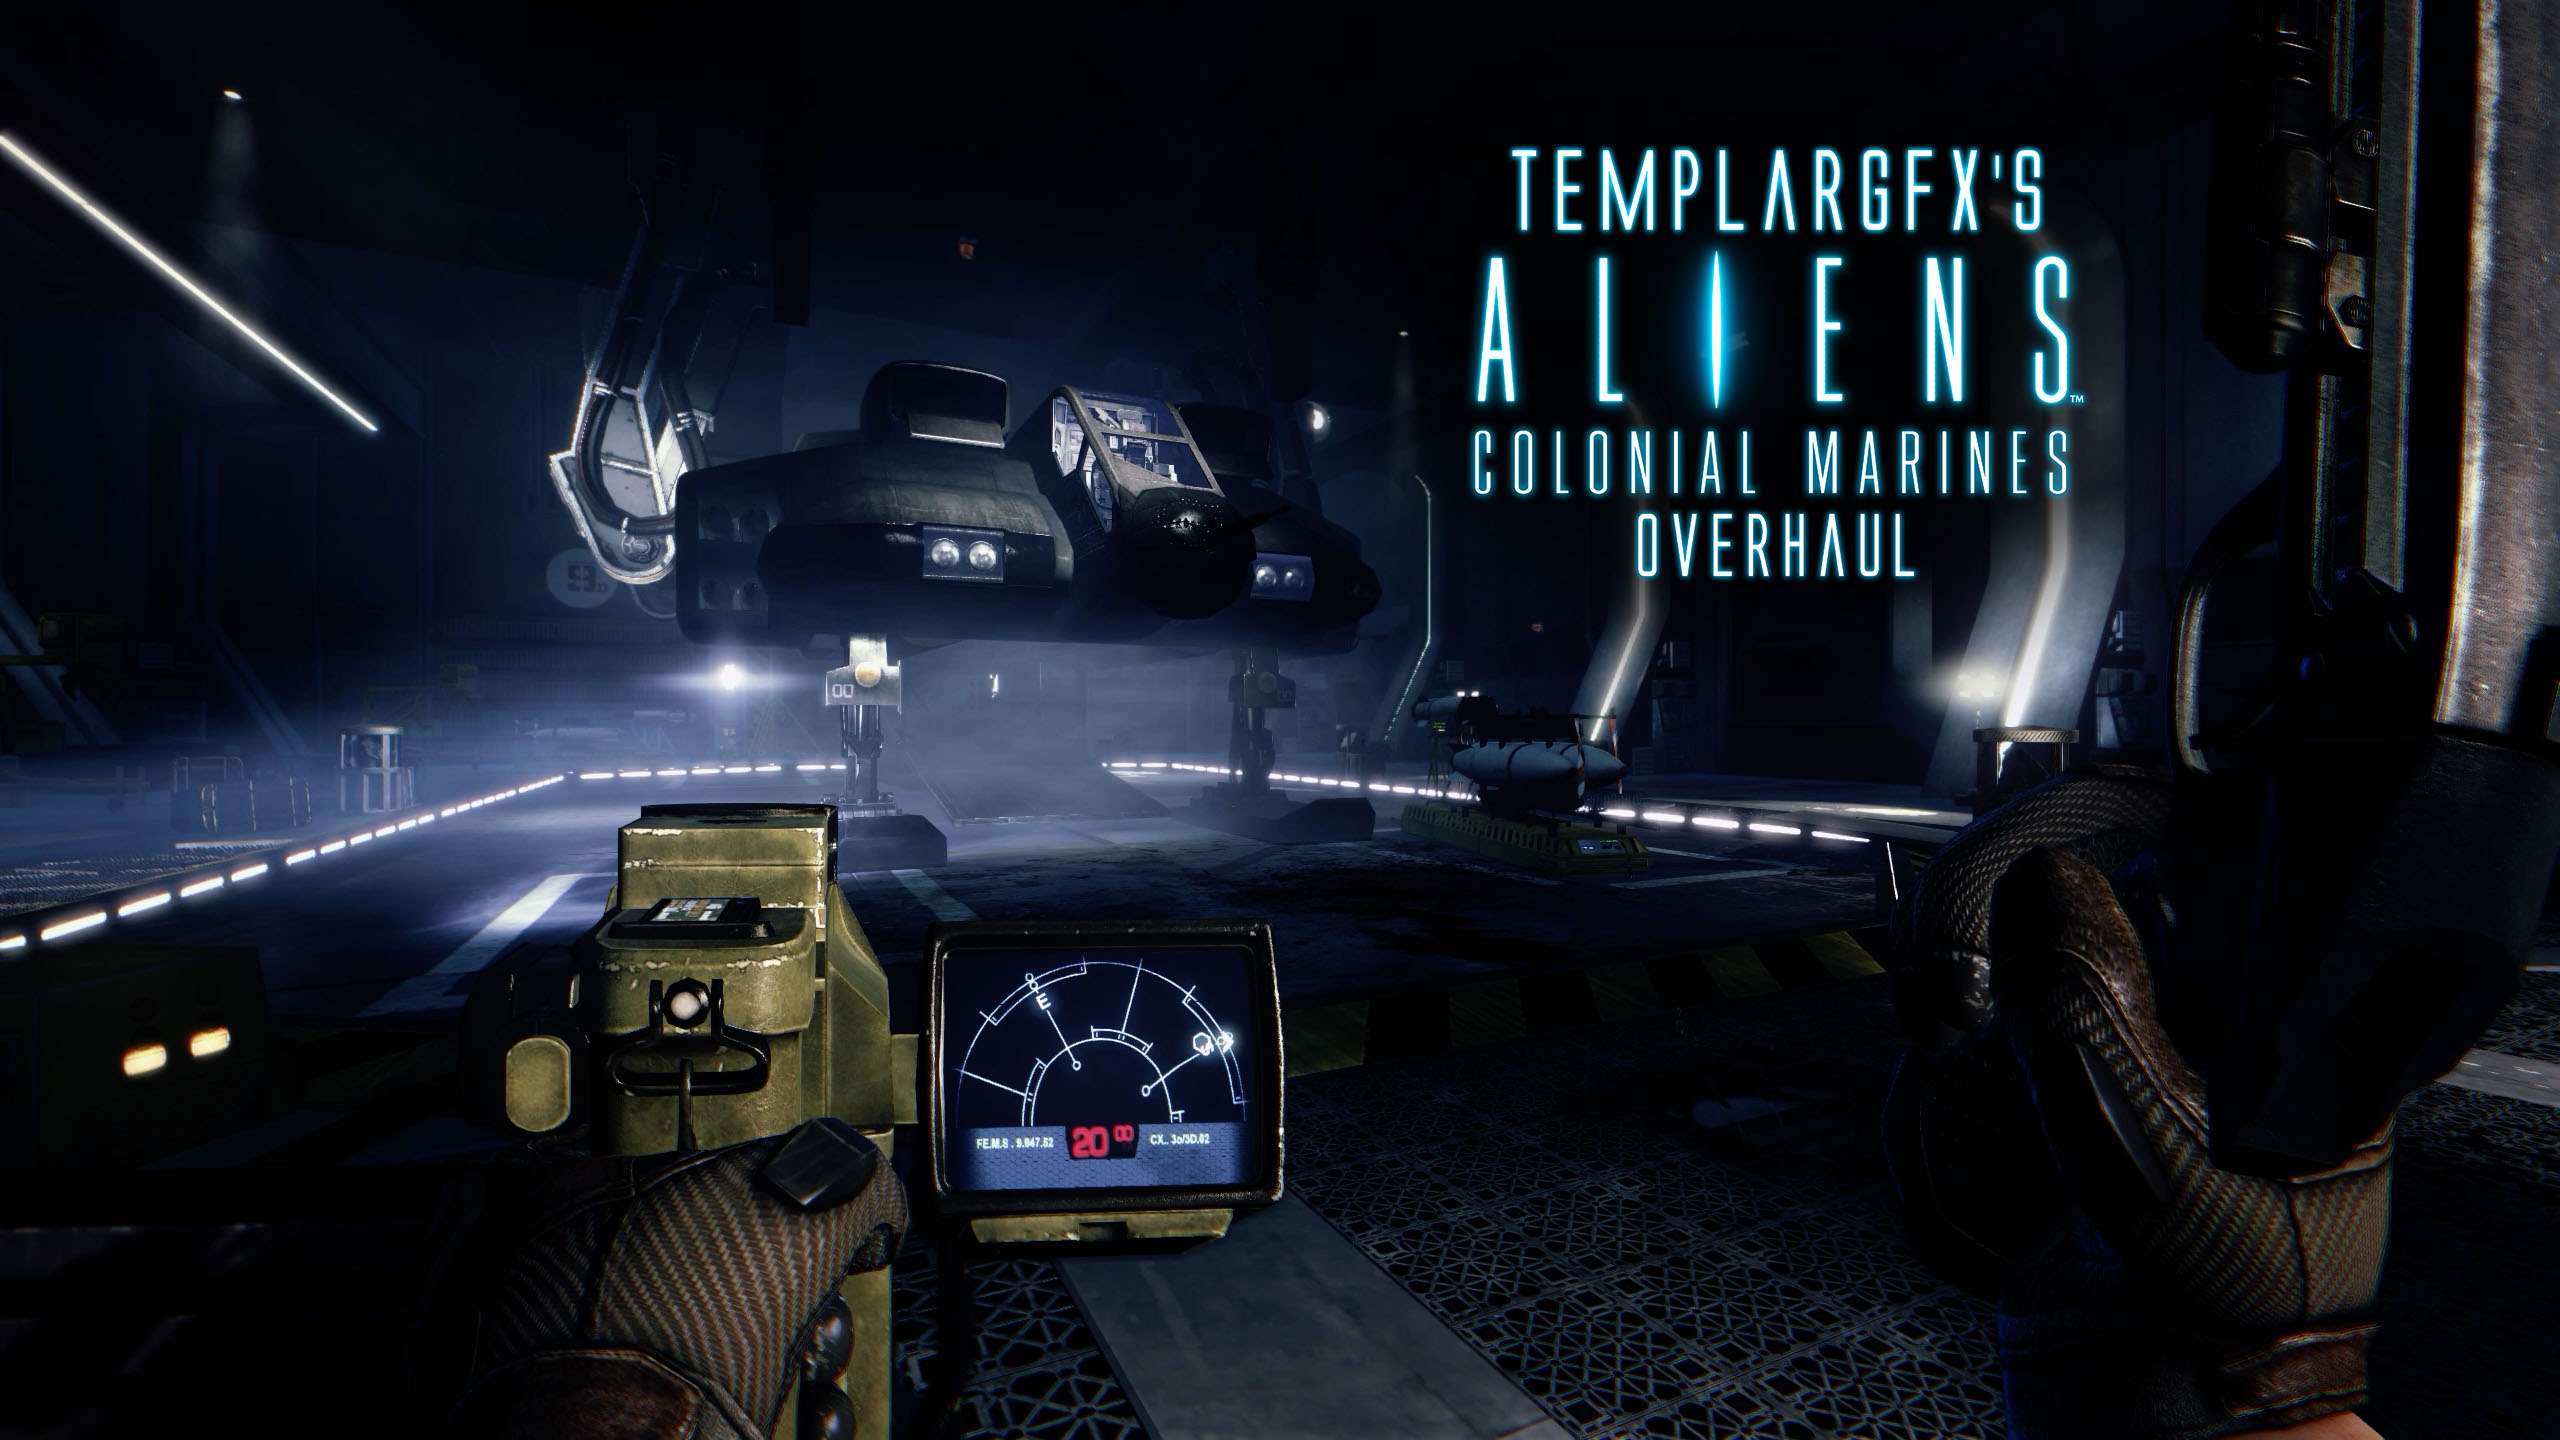 Aliens colonial marines game